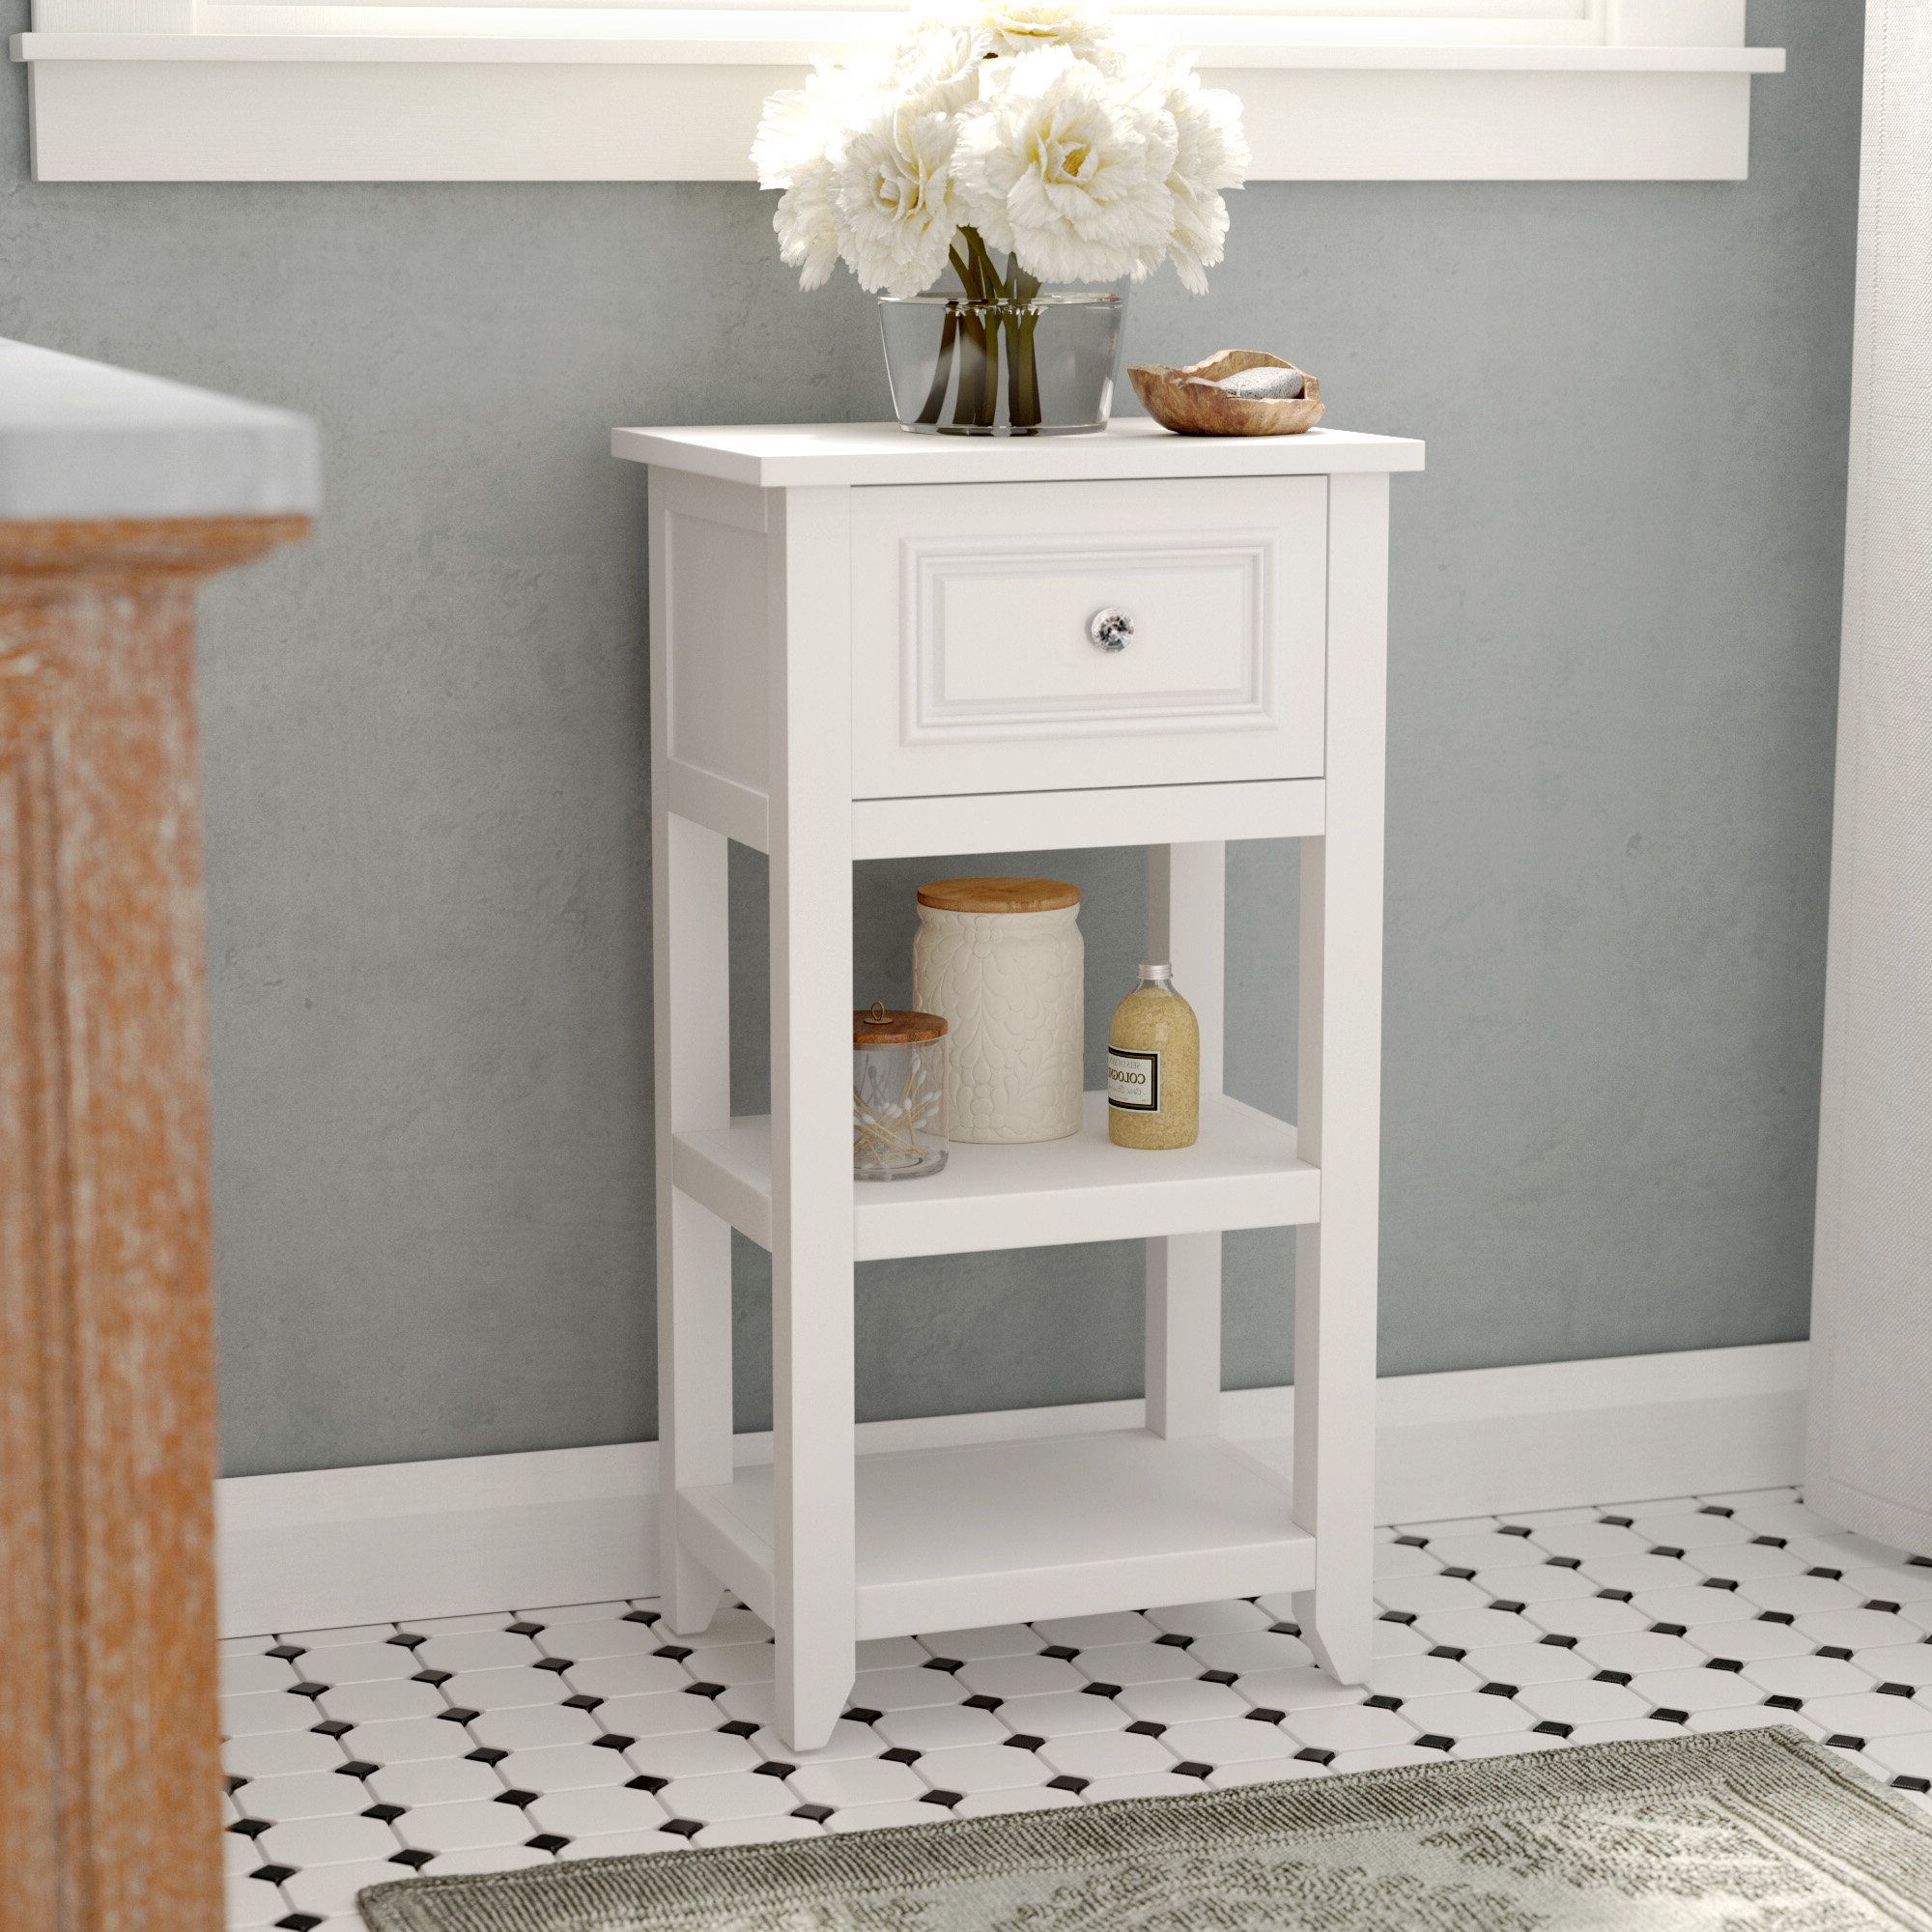 Beachcrest Home Woodley Freestanding Bathroom Cabinet & Reviews | Wayfair Within Freestanding Tables With Drawers (Gallery 9 of 20)